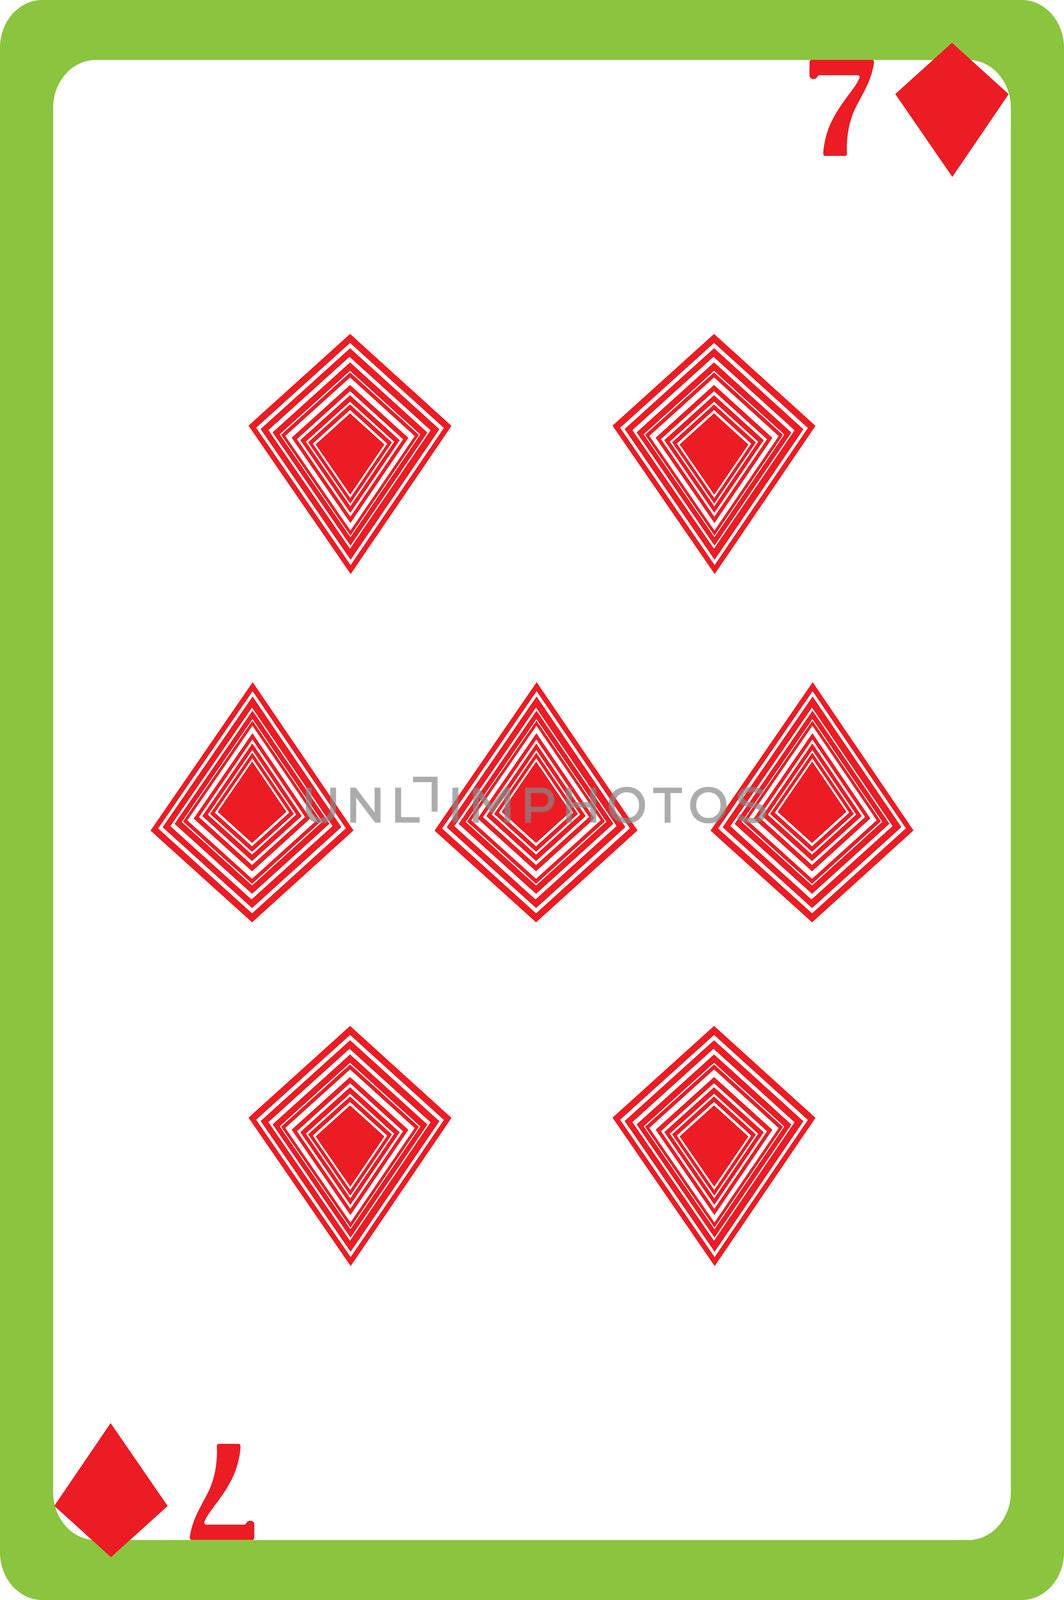 Scale hand drawn illustration of a playing card representing the seven of diamonds, one element of a deck